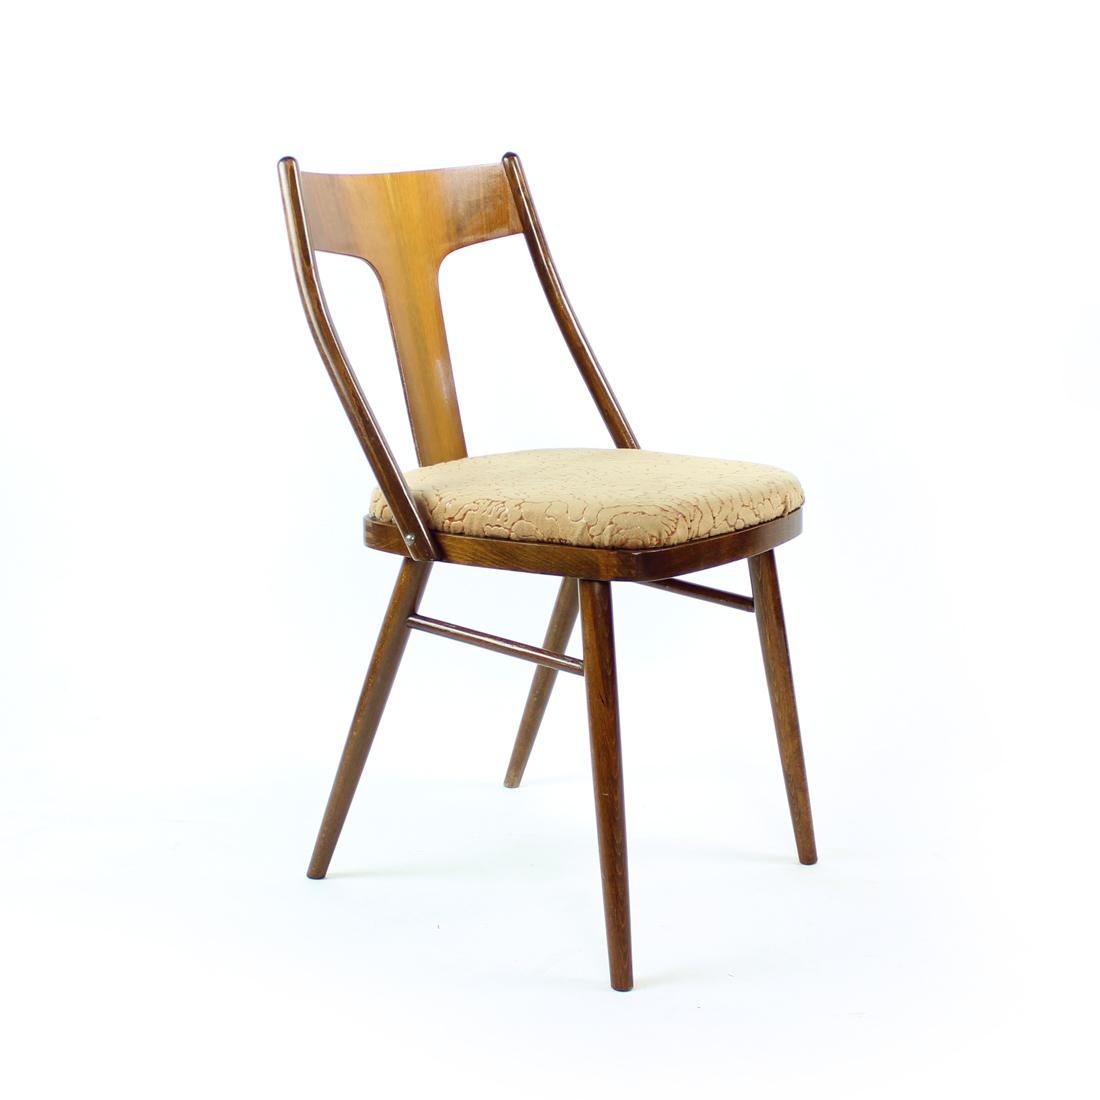 Beautiful set of elegant dining chairs from midcentury era. Produced in 1960s in Czechoslovakia. The chairs have a strong oak wood construction with an elegant backrest made of in T shape with walnut veneer finish. Trully a beautiful combination.